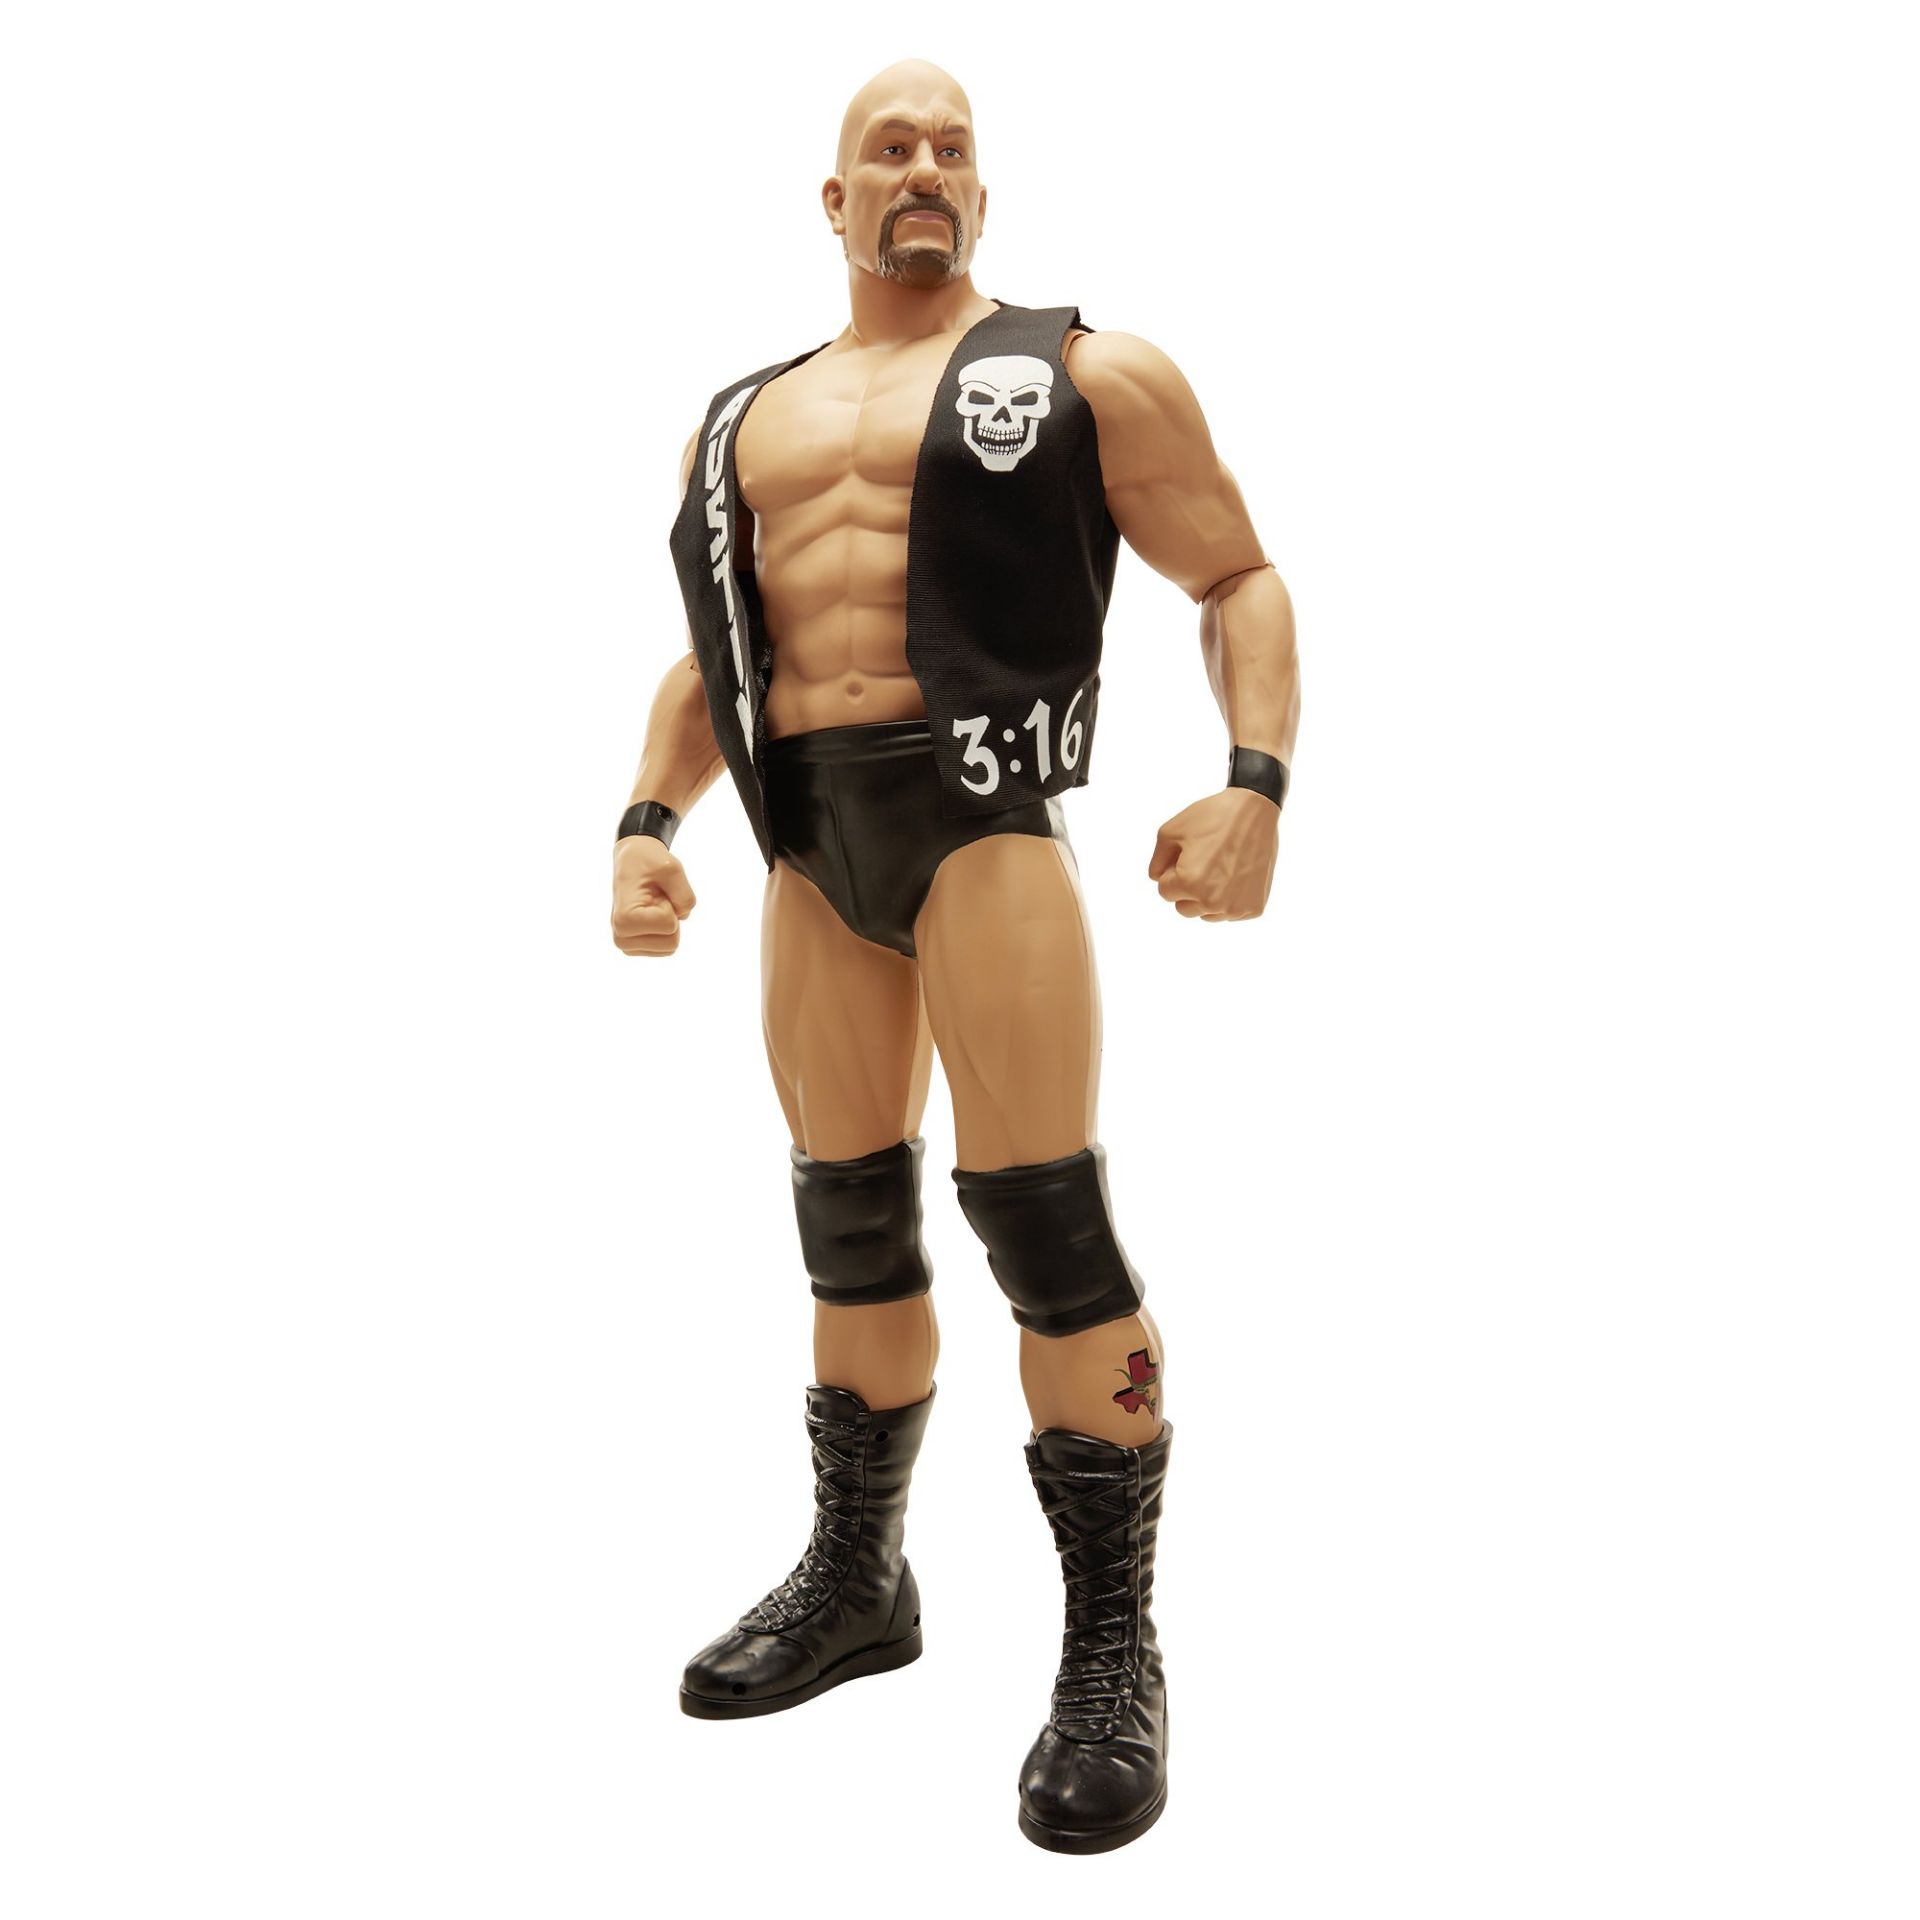 V Brand New Massive 31" WWE Stone Cold Steve Austin Action Figures - 3count.co.uk Price £28.99 - 8 - Image 5 of 8